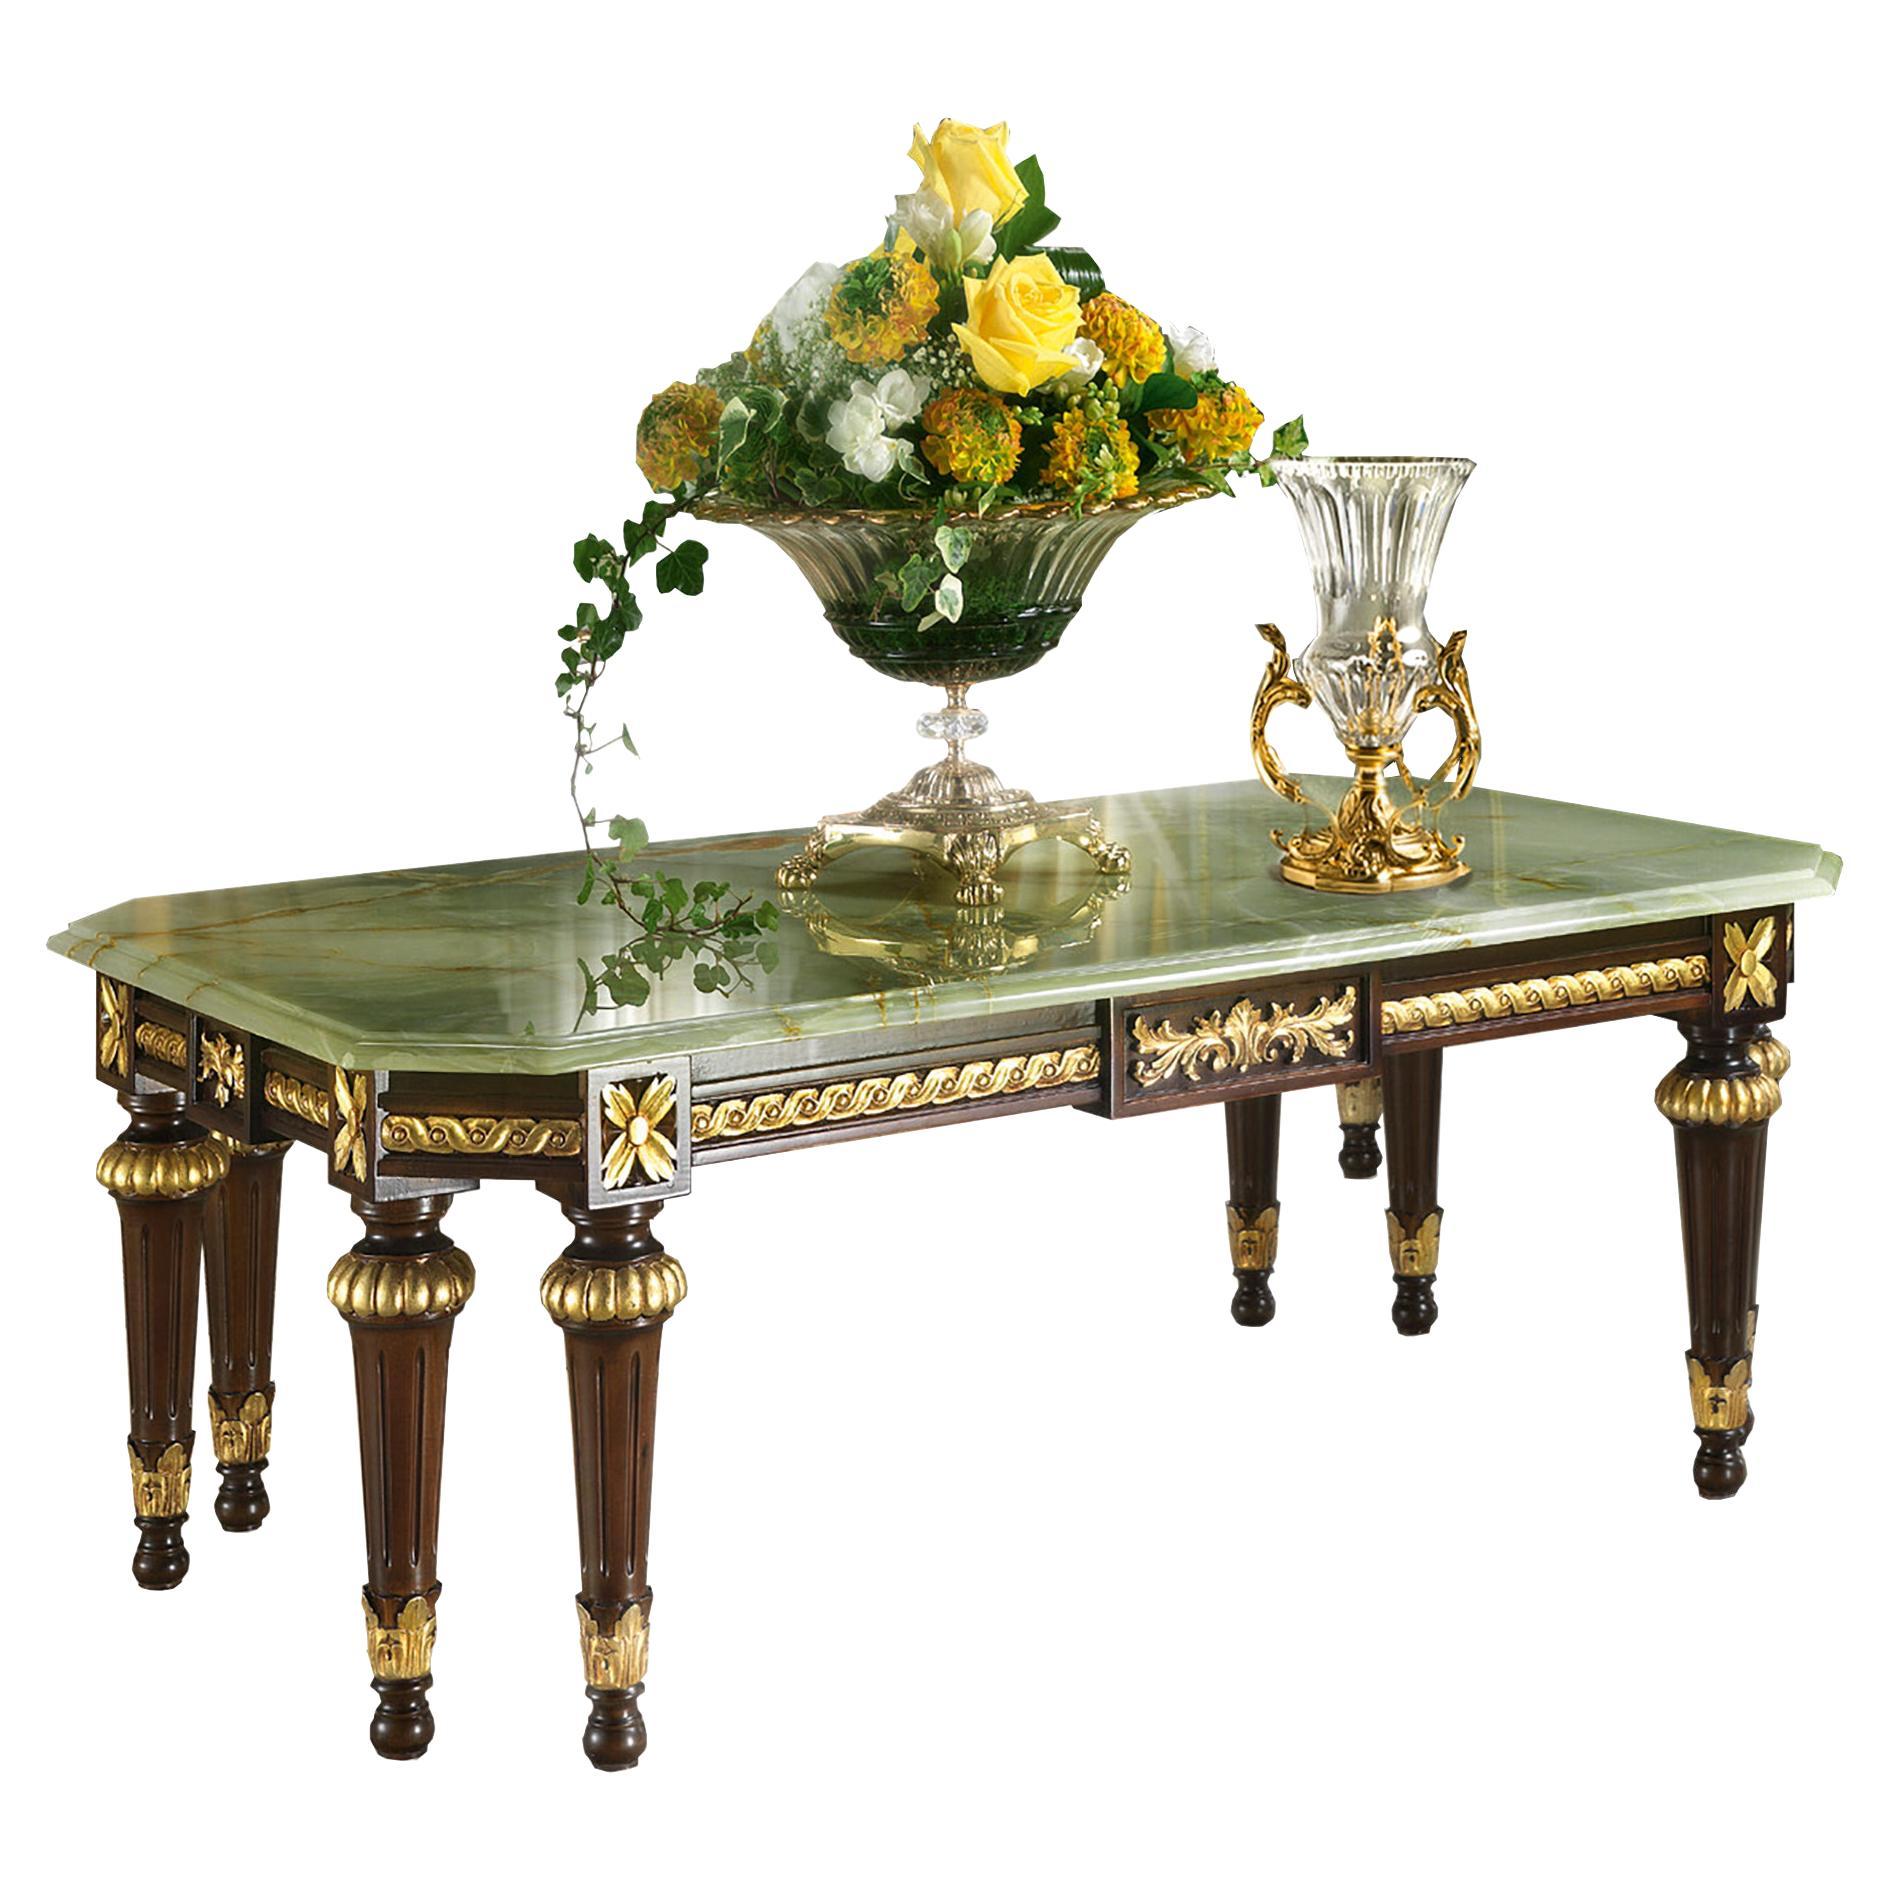 Rectangular Coffee Table with Green Onyx Top by Modenese Luxury